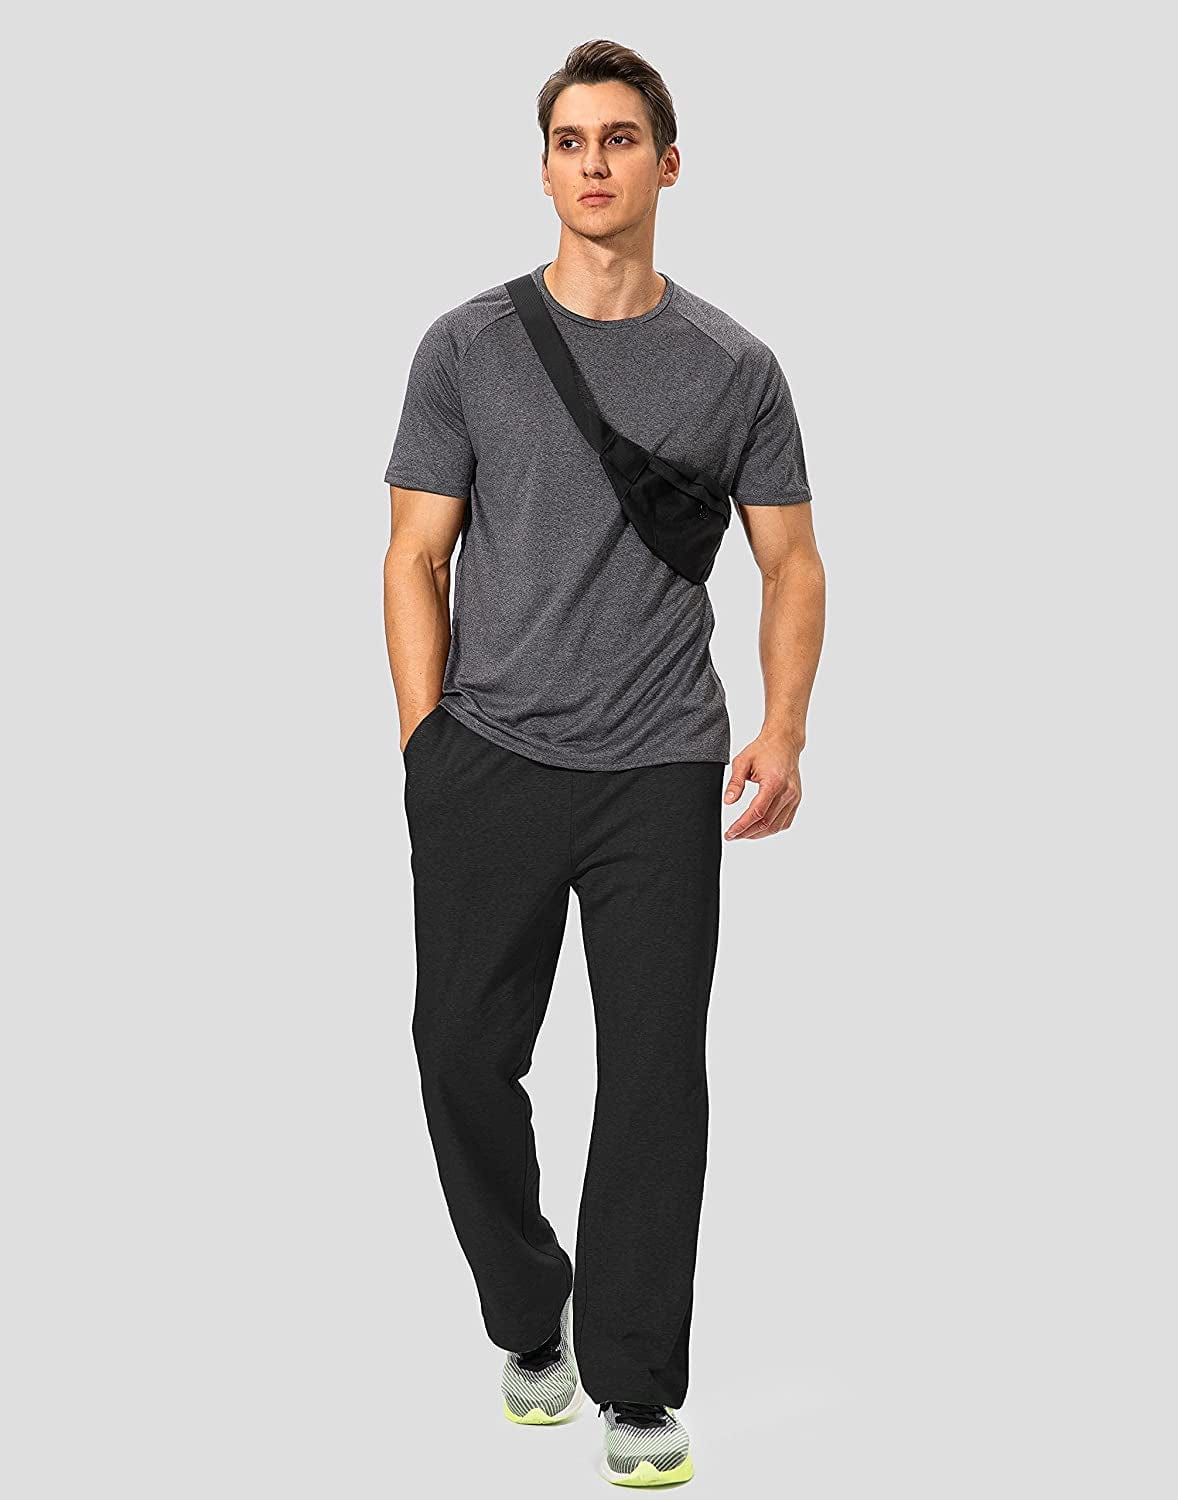 Men's Modal Yoga Sweatpants with Tight Ankle Athletic Lounge Pants Casual  Jersey Pants with Pockets,Drawstring Elastic Joggers Sweatpants Loose Fit